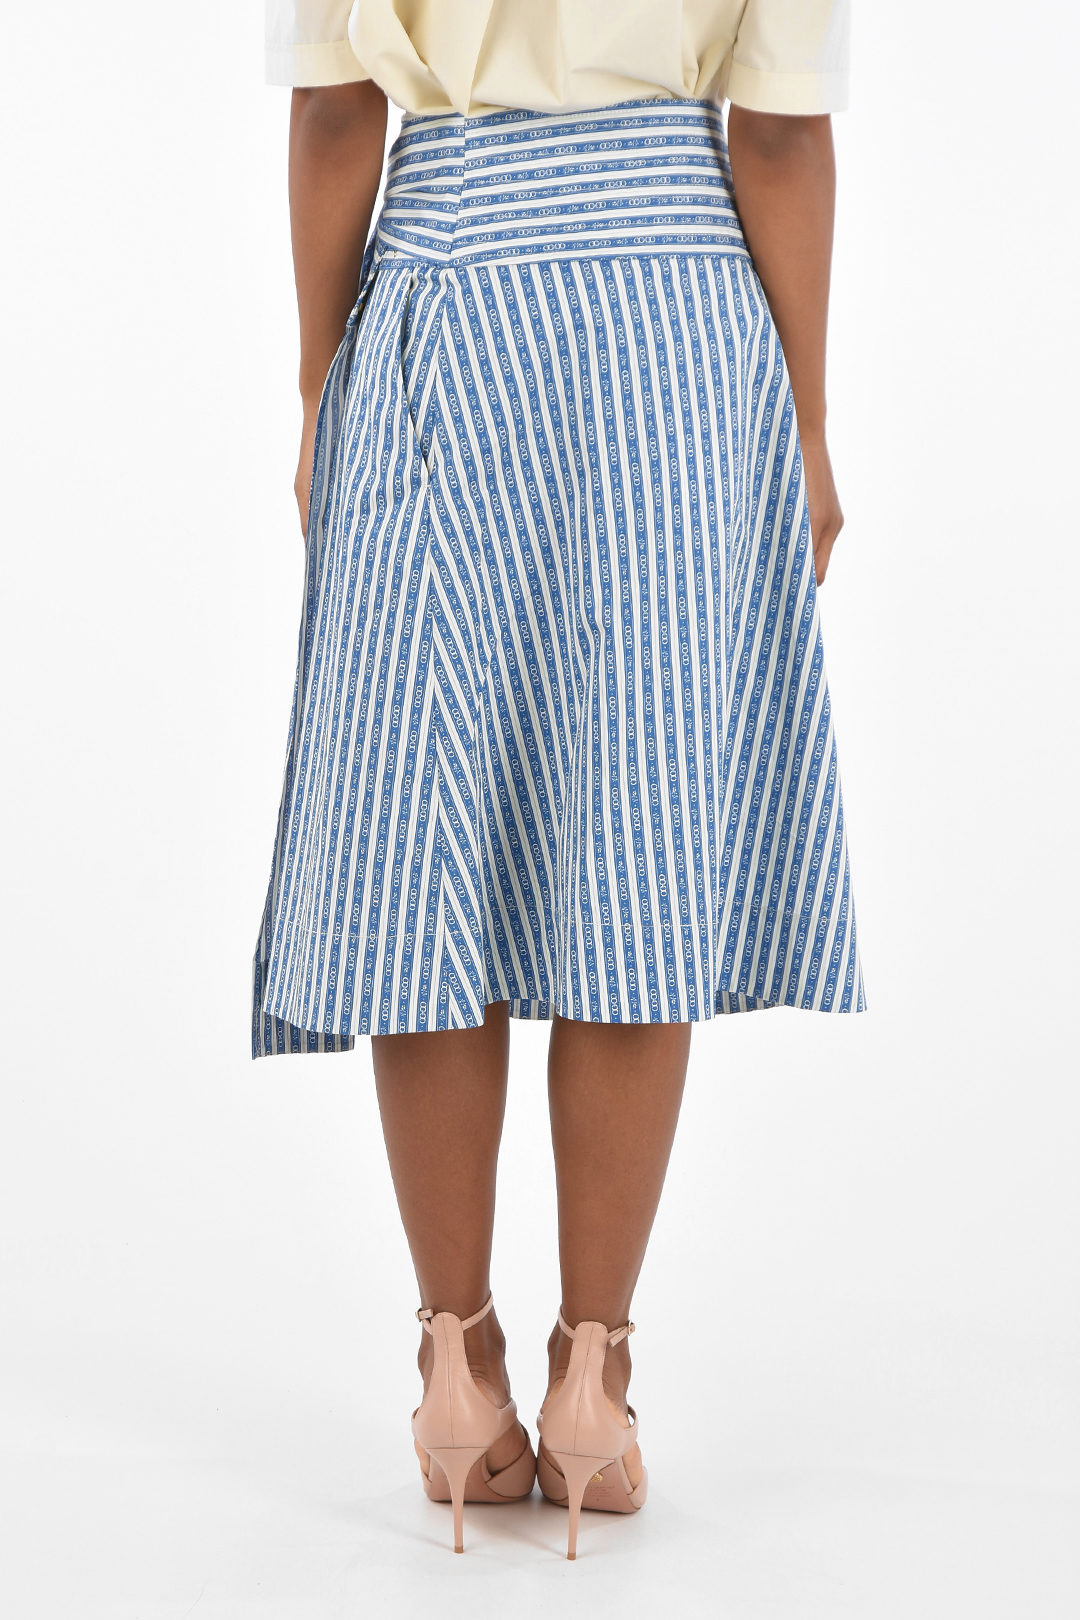 Tory Burch Printed a-line skirt with belt women - Glamood Outlet